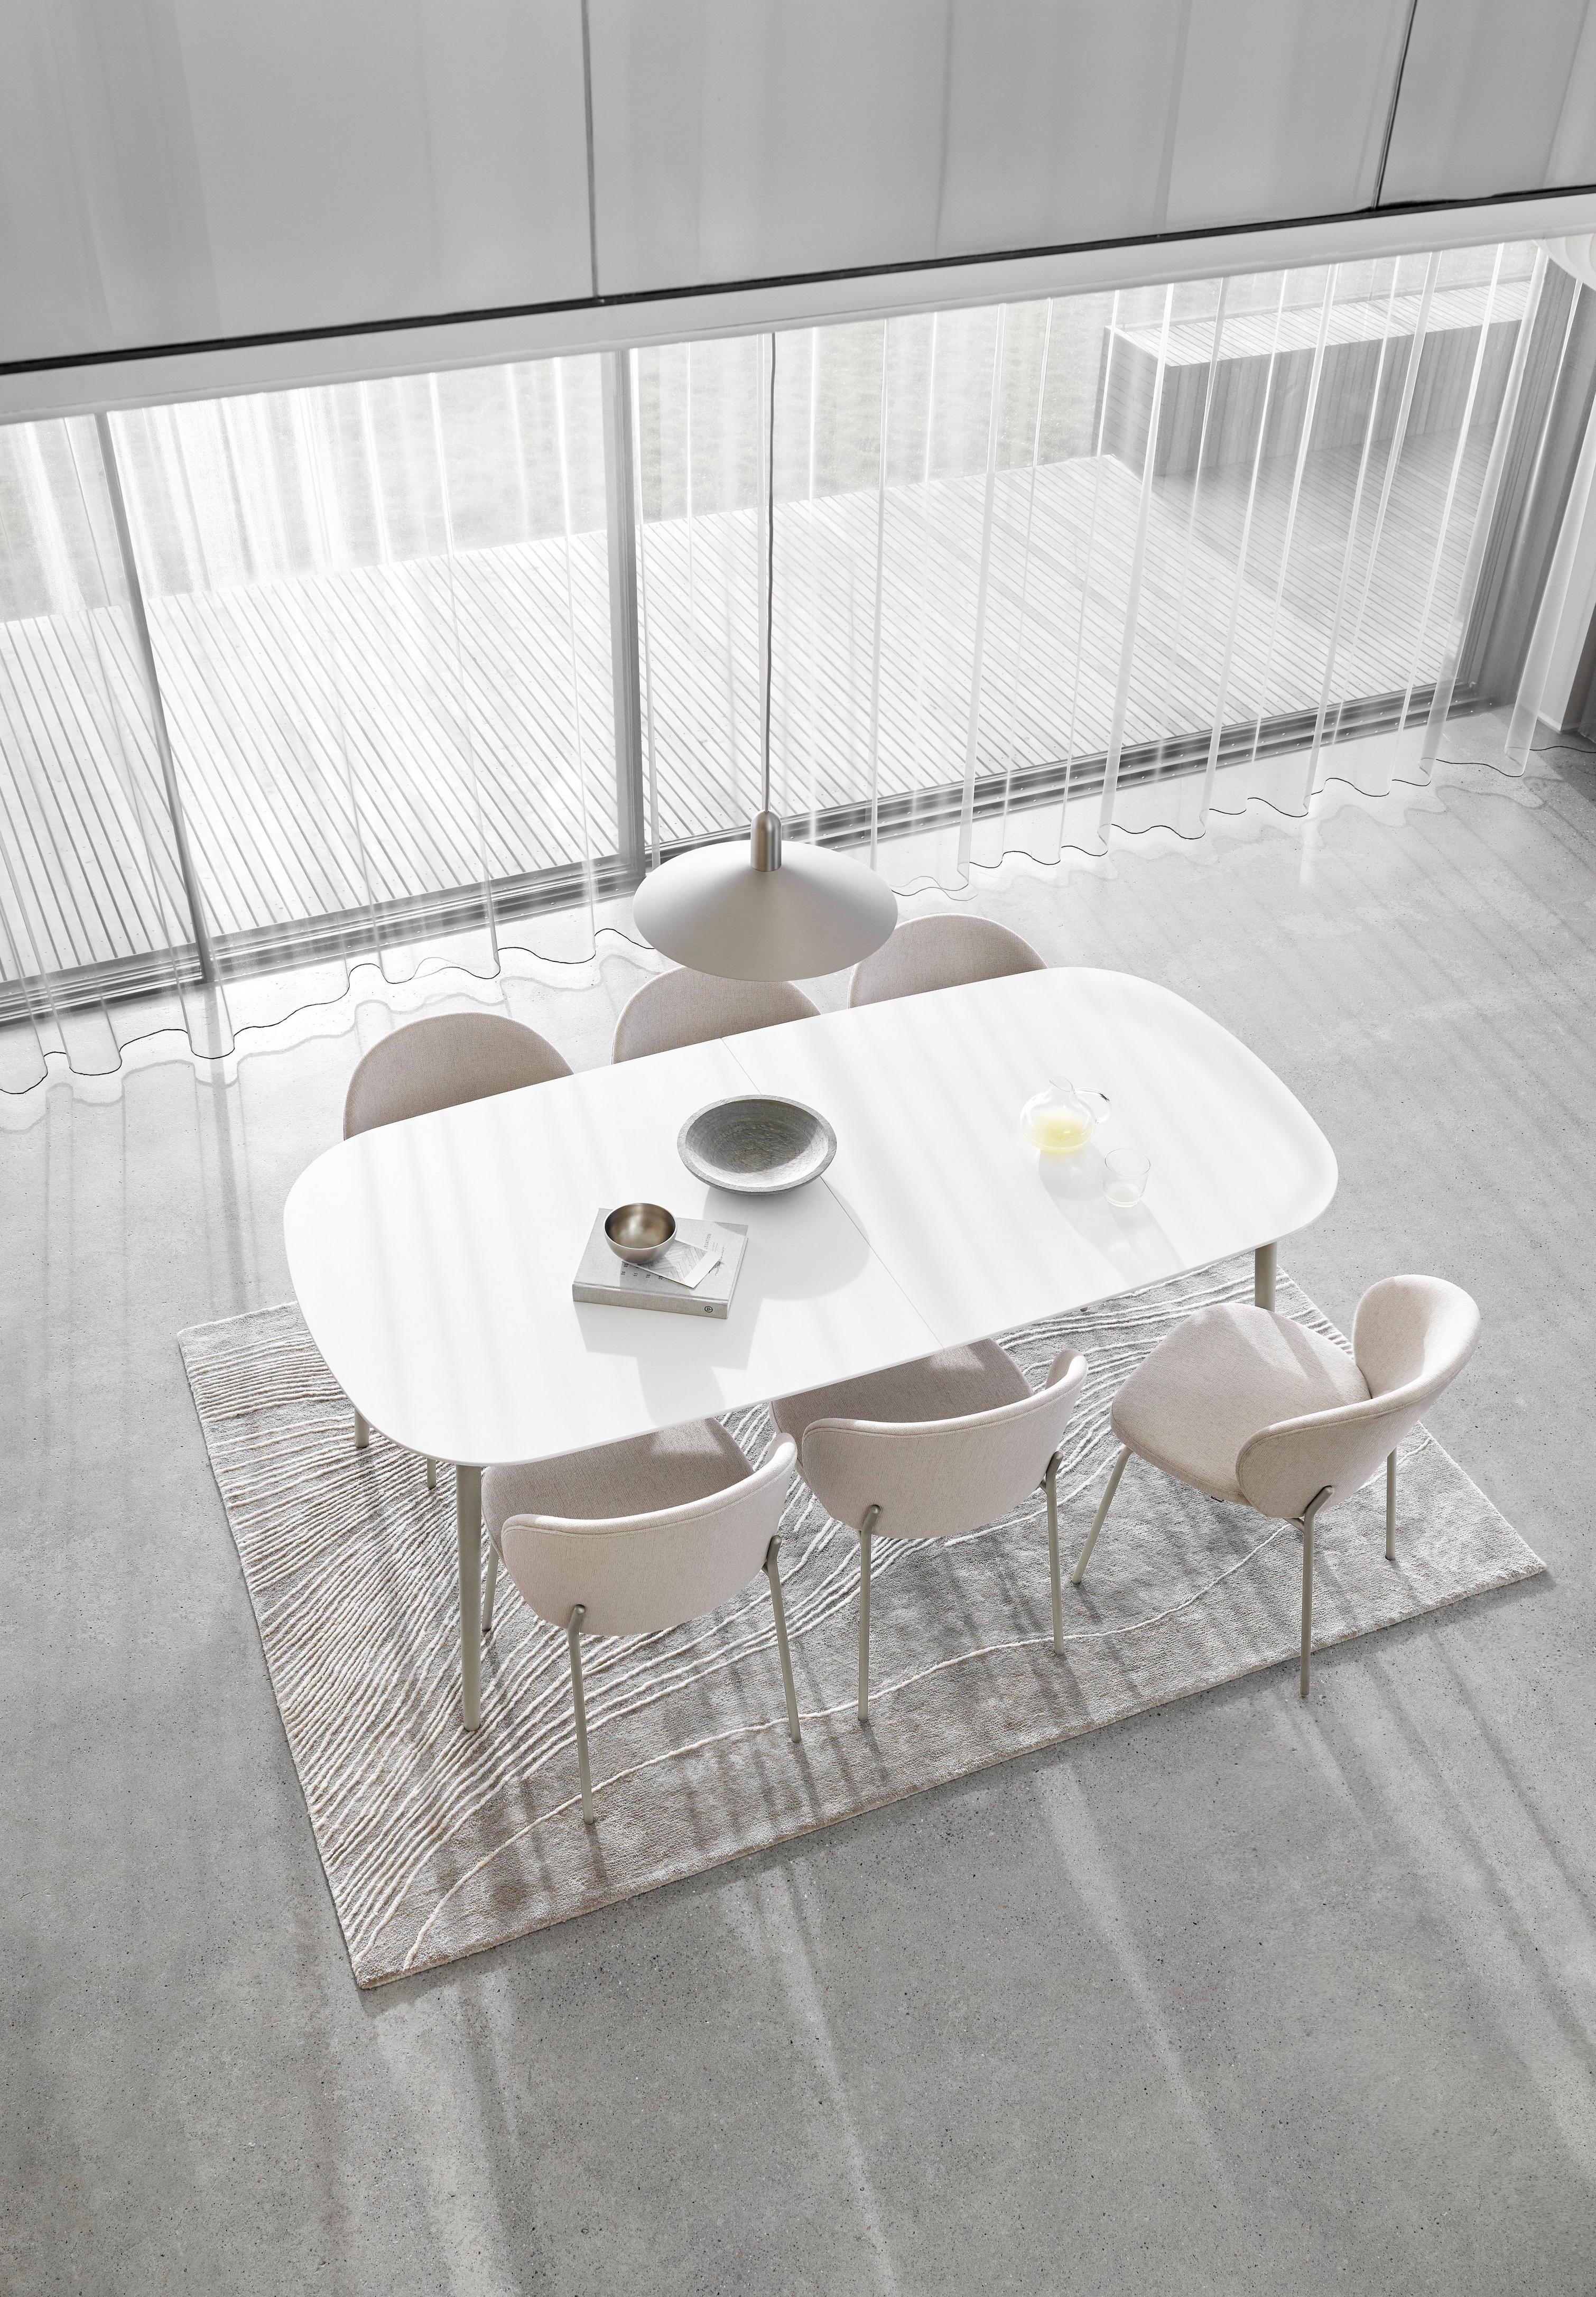 Minimalist dining area with white oval table, chairs, sheer curtains, and textured rug.